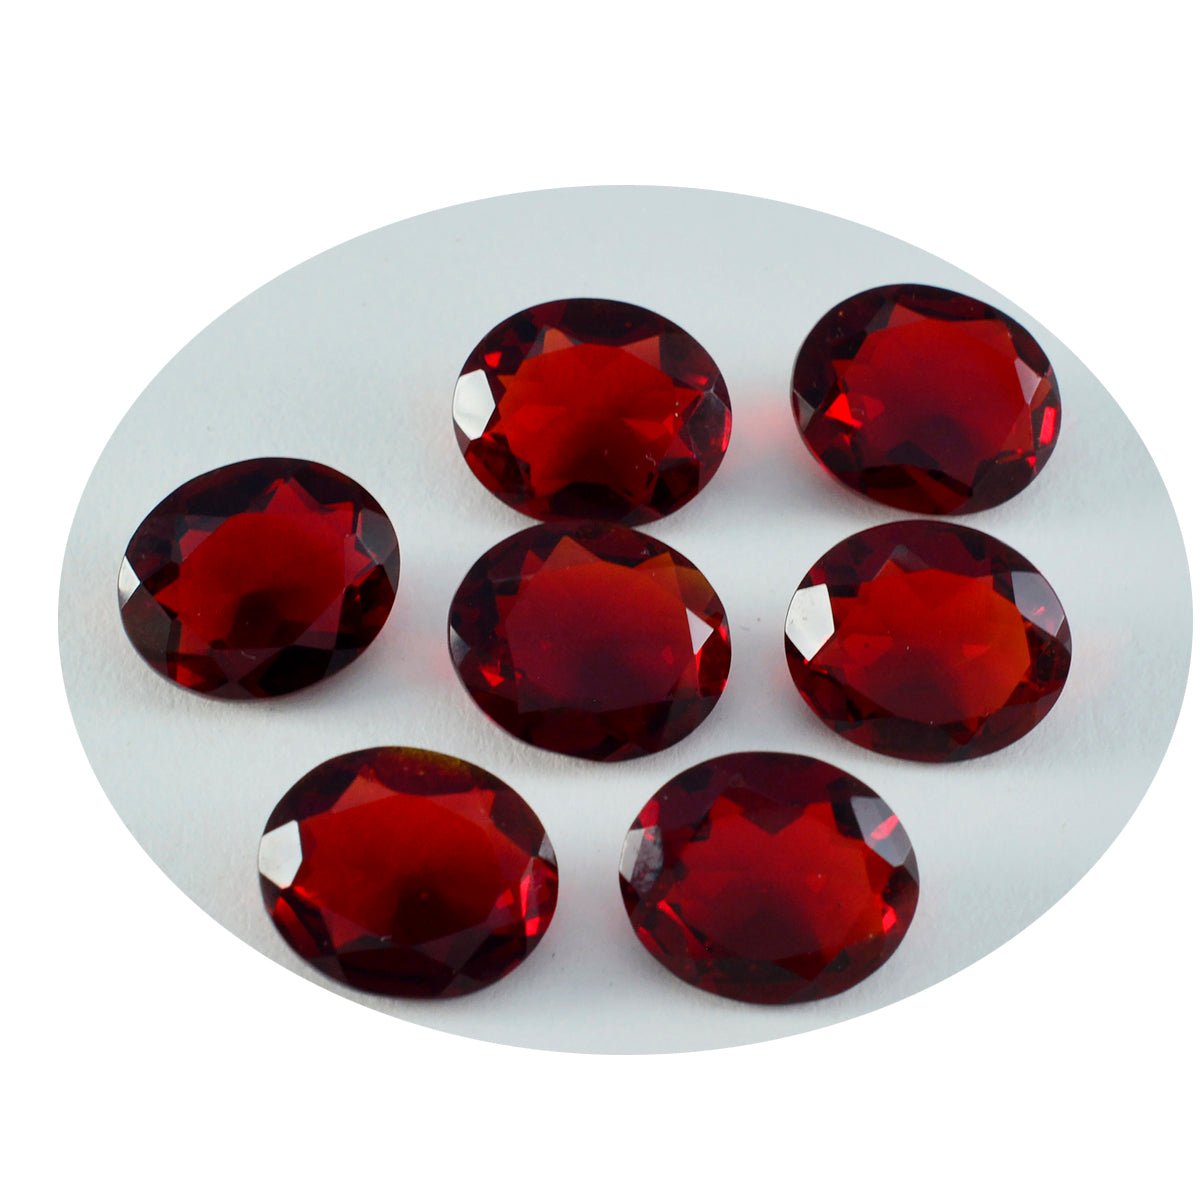 Riyogems 1PC Red Ruby CZ Faceted 7x9 mm Oval Shape lovely Quality Stone